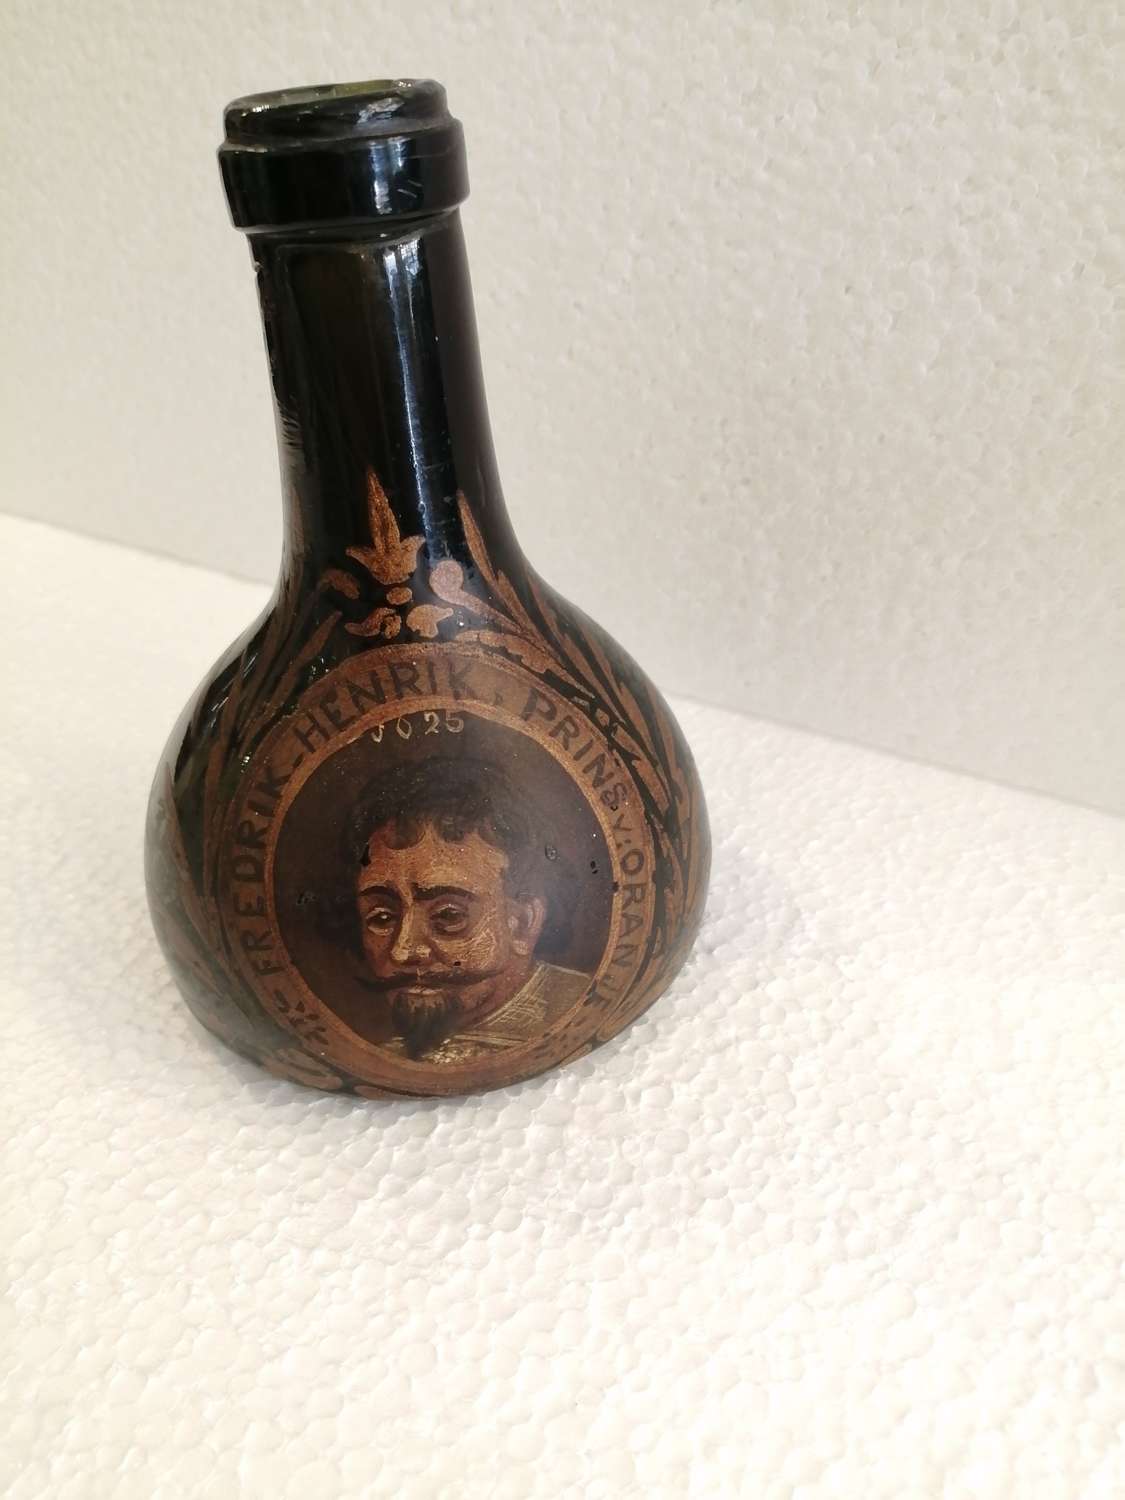 A rare 19th century Dutch decorated green bottle